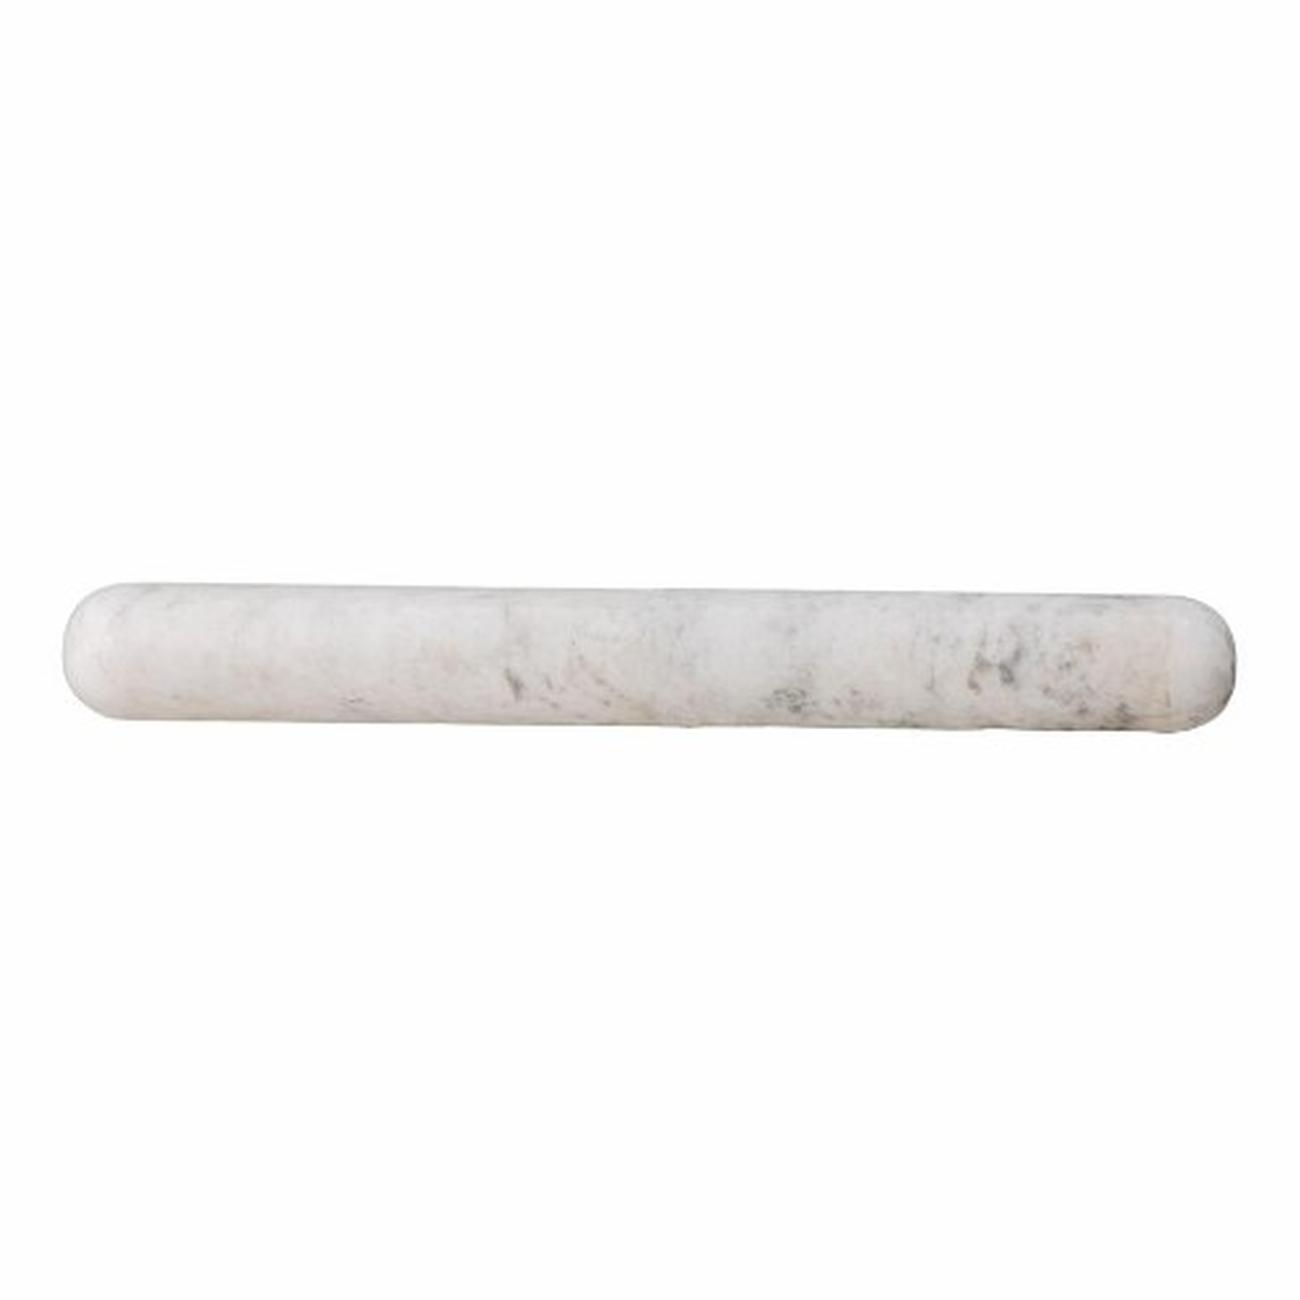 maica-rolling-pin-white-marble - Maica Rolling Pin White Marble